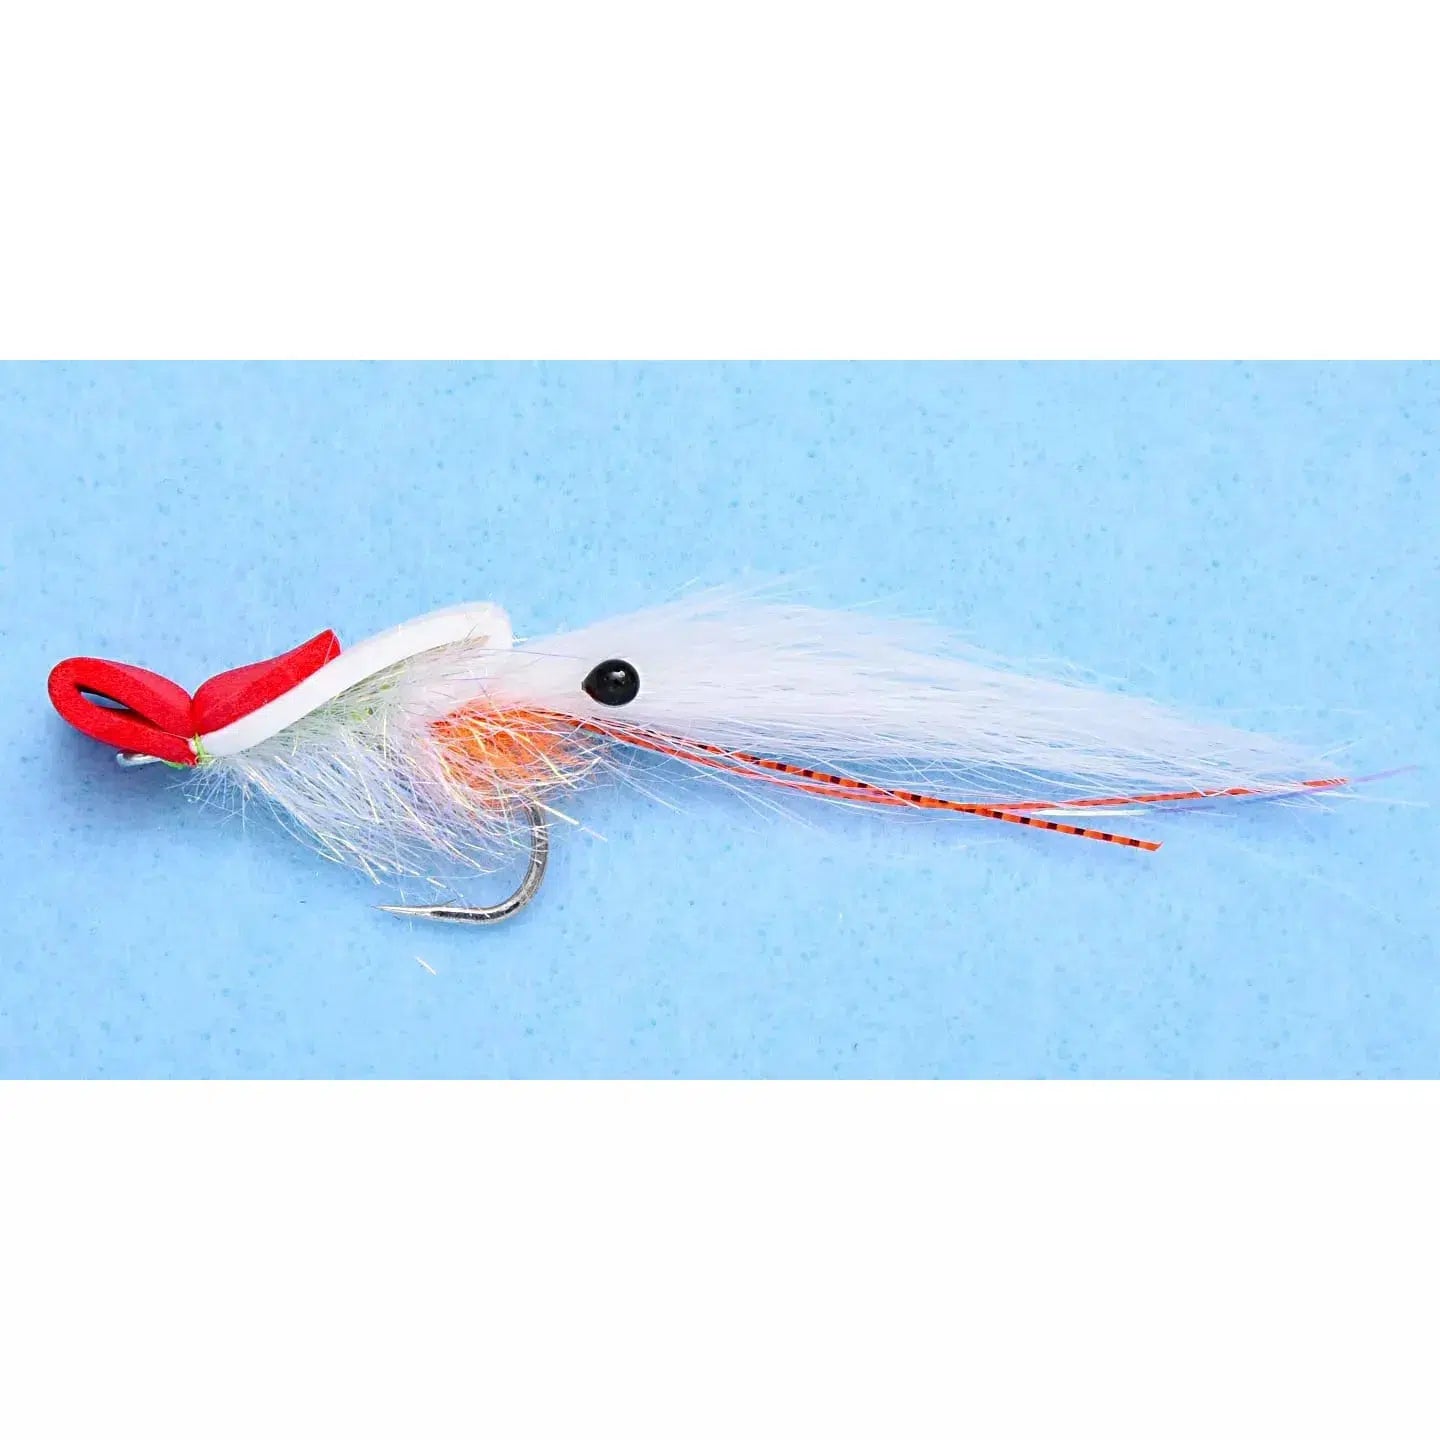 Enrico Puglisi Top Water Shrimp Fly-Lure - Fly-Enrico Puglisi-Shrimp-Size #2/0-Fishing Station